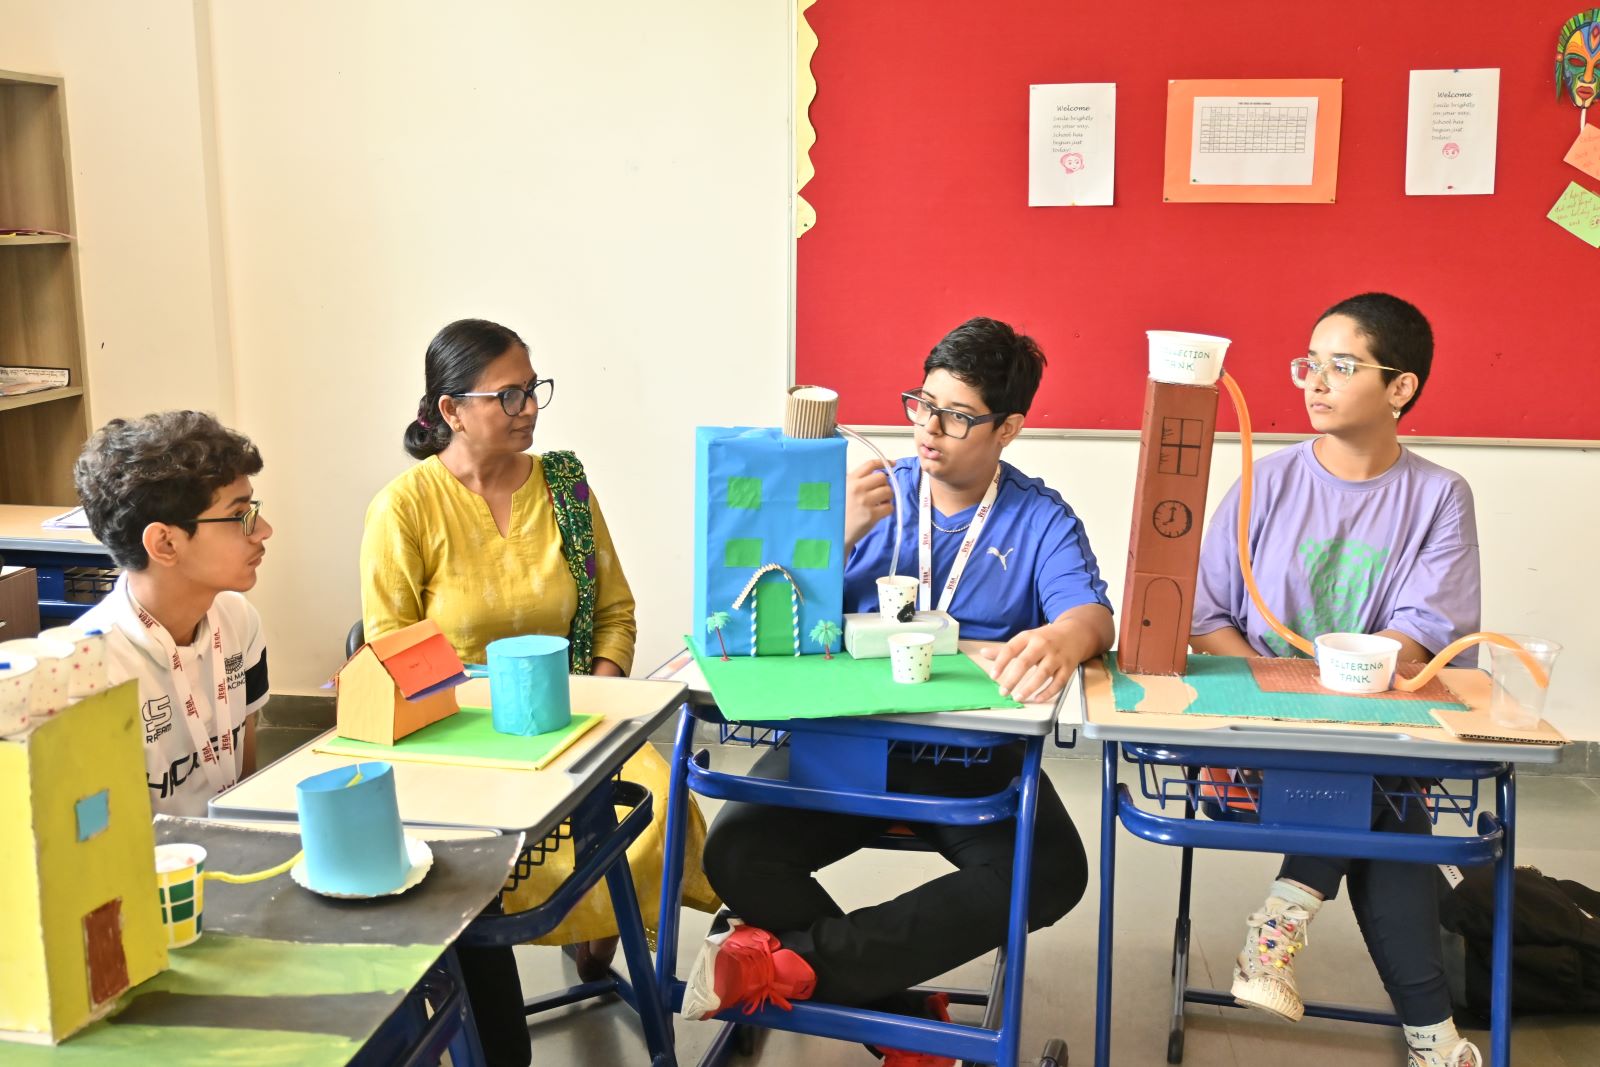 The Best CBSE School in Gurgaon with Project-Based Learning